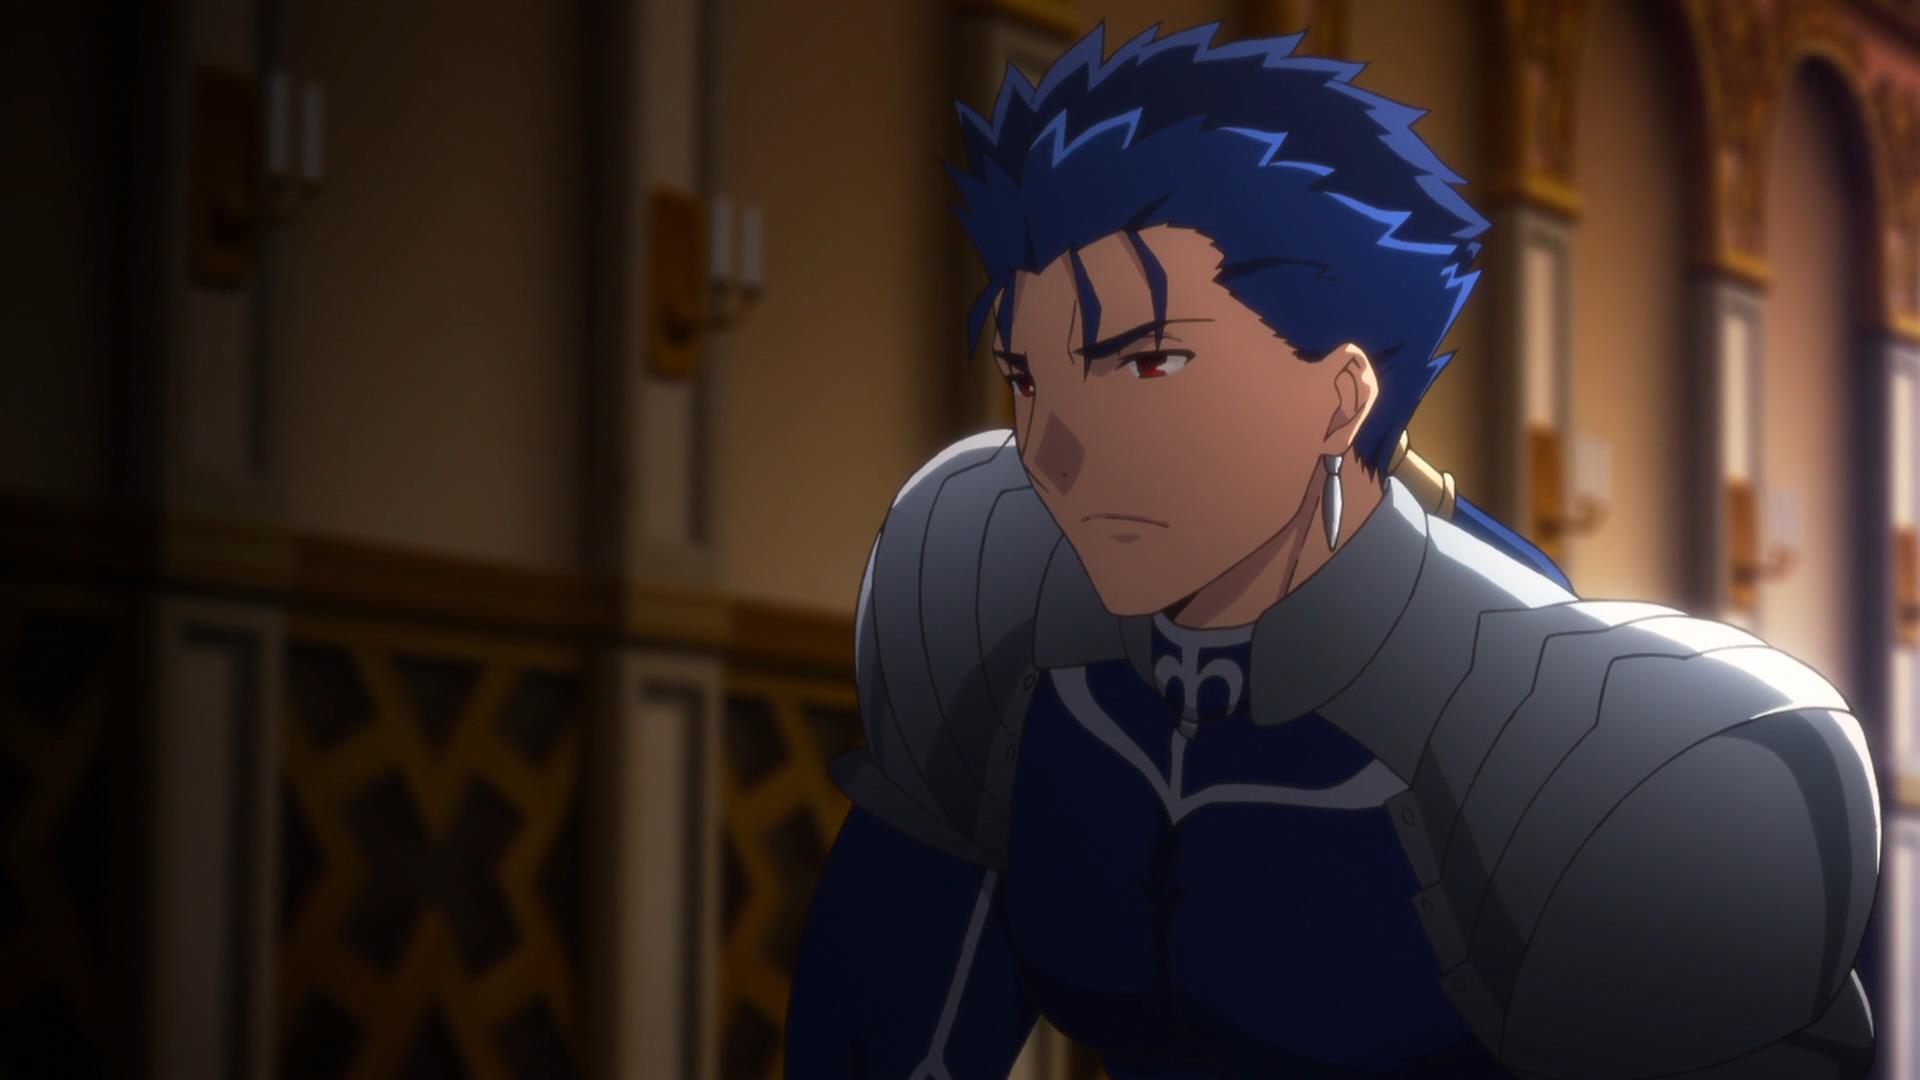 Fate Stay Night Unlimited Blade Works 19 Now Lean Forward And Kill Yourself Astronerdboy S Anime Manga Blog Astronerdboy S Anime Manga Blog